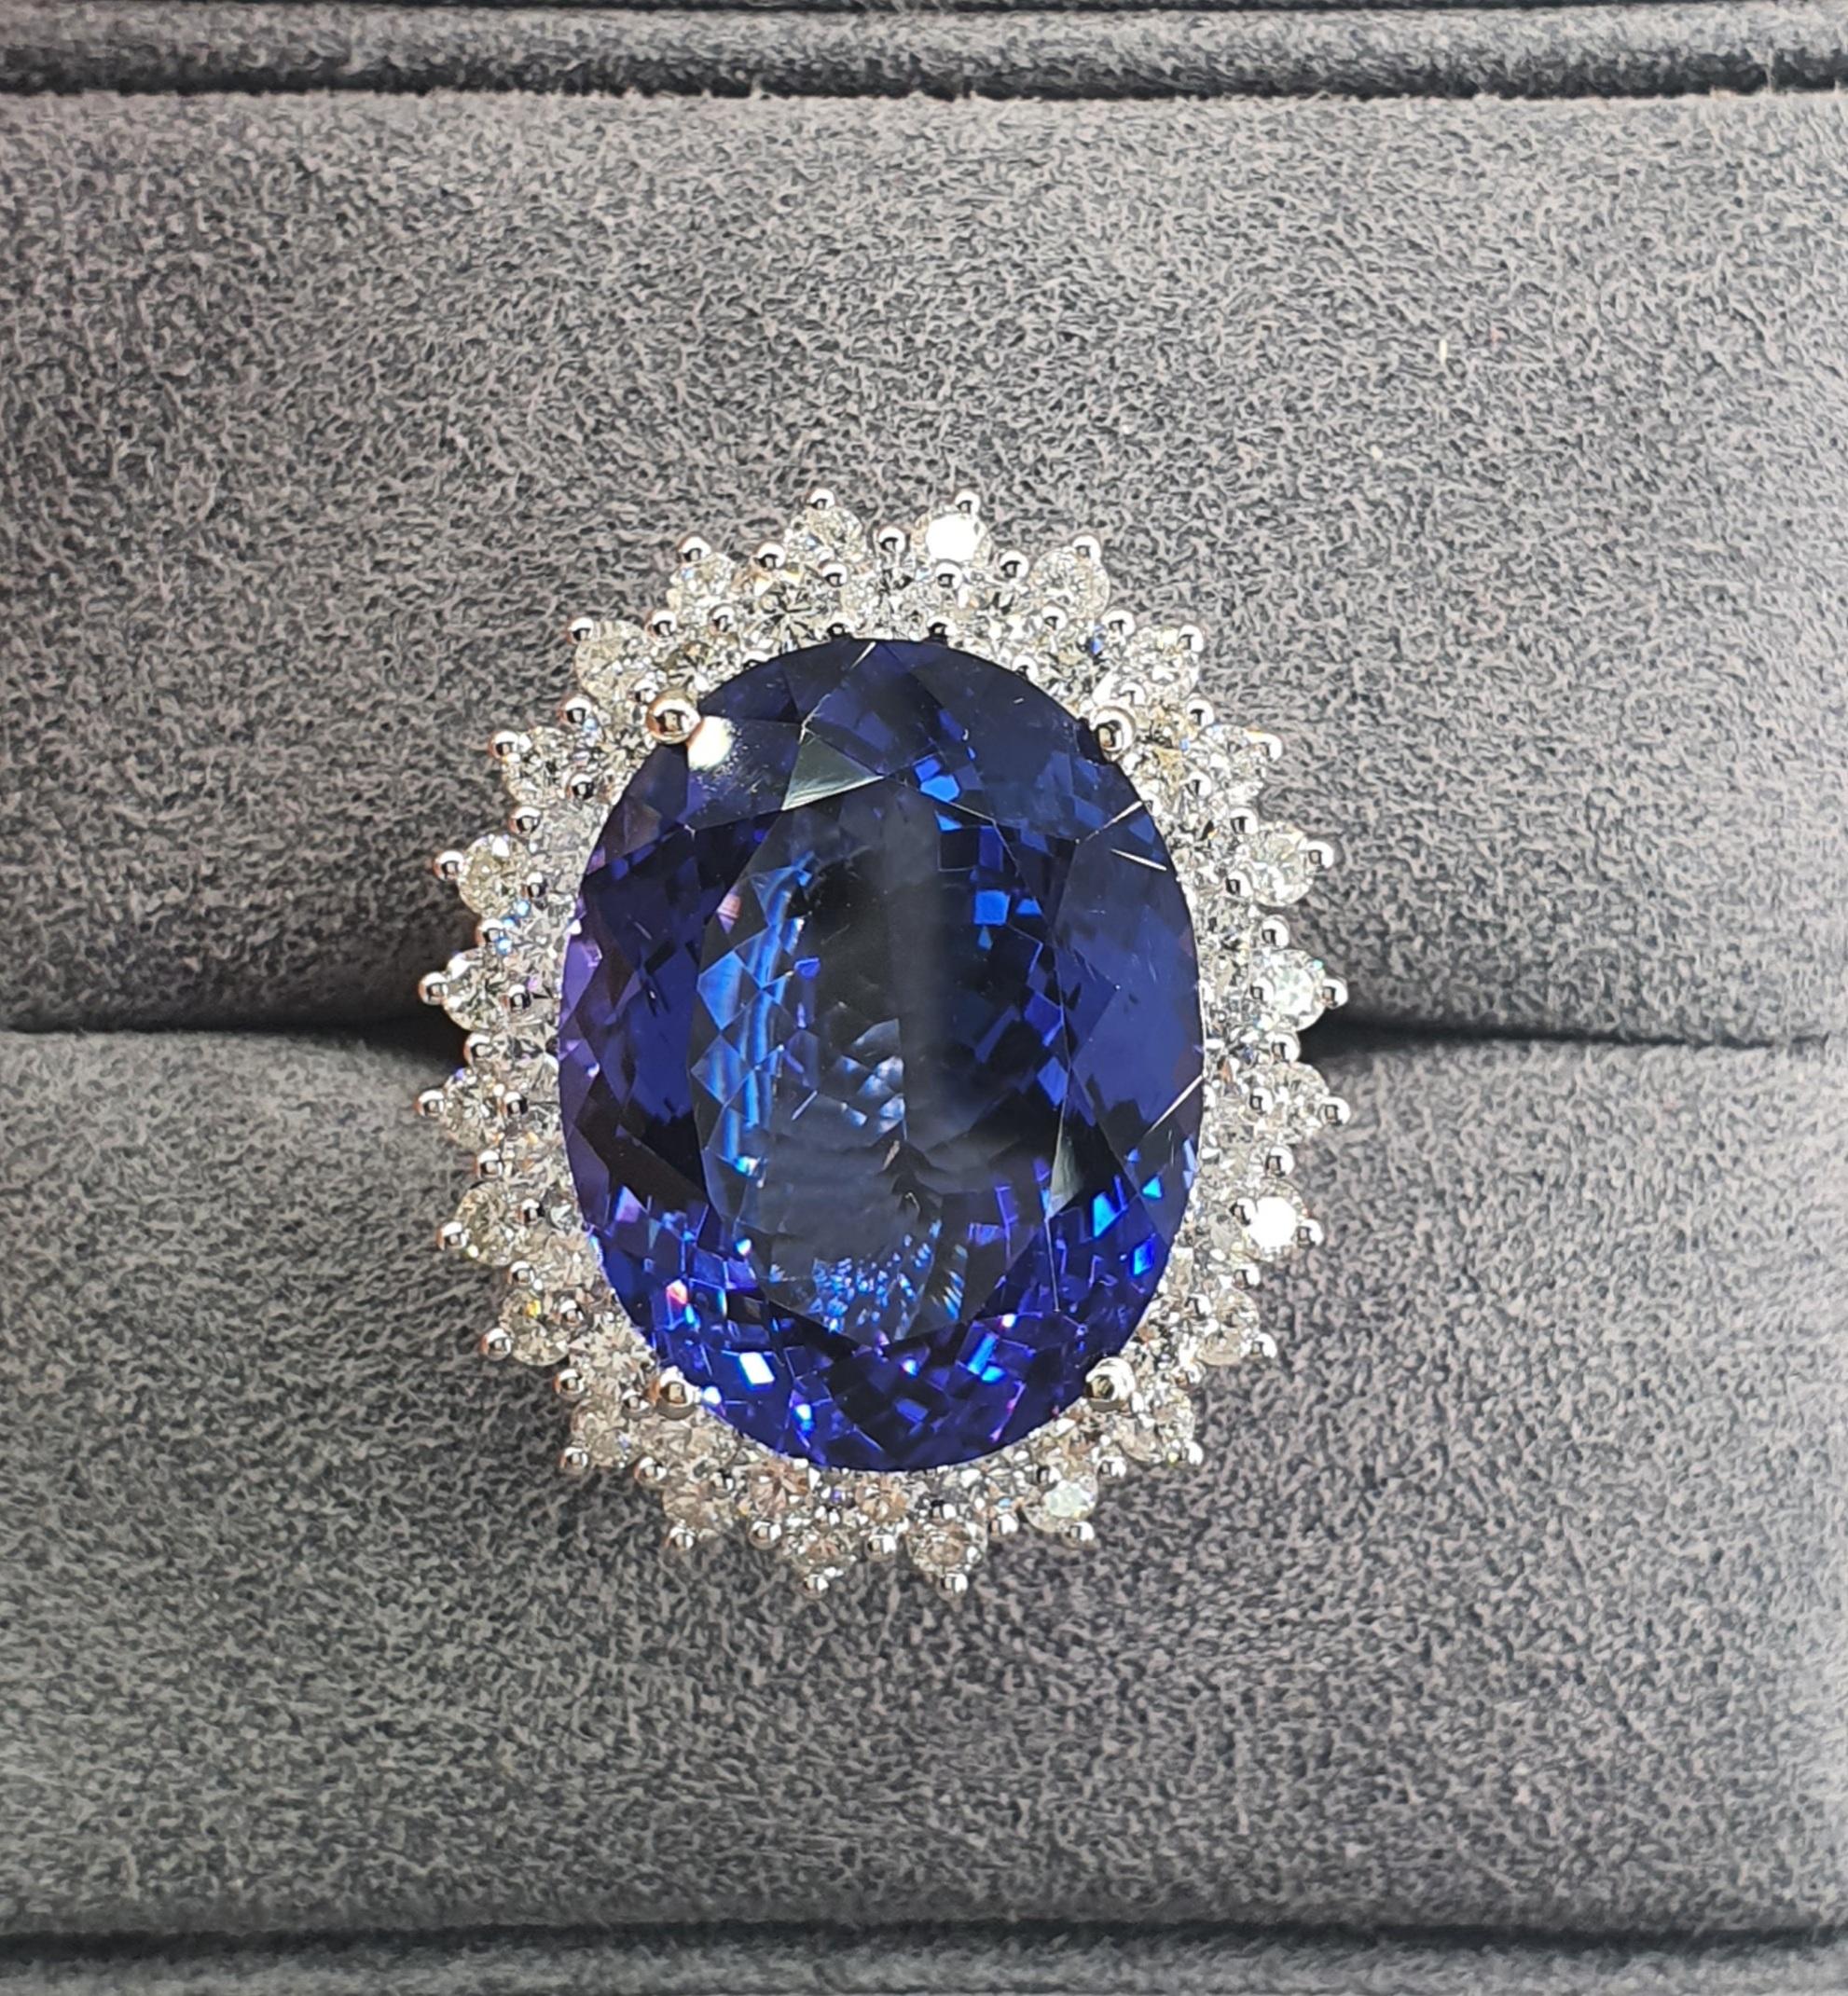 White Gold Ladies Ring with a bright polish finish. 
Condition is new.
 Containing: One prong set oval modified brilliant cut natural tanzanite, measuring 20.56 x 15.94 x 9.35mm, exact weight 22.43ct., clarity is eye clean, type I, medium,